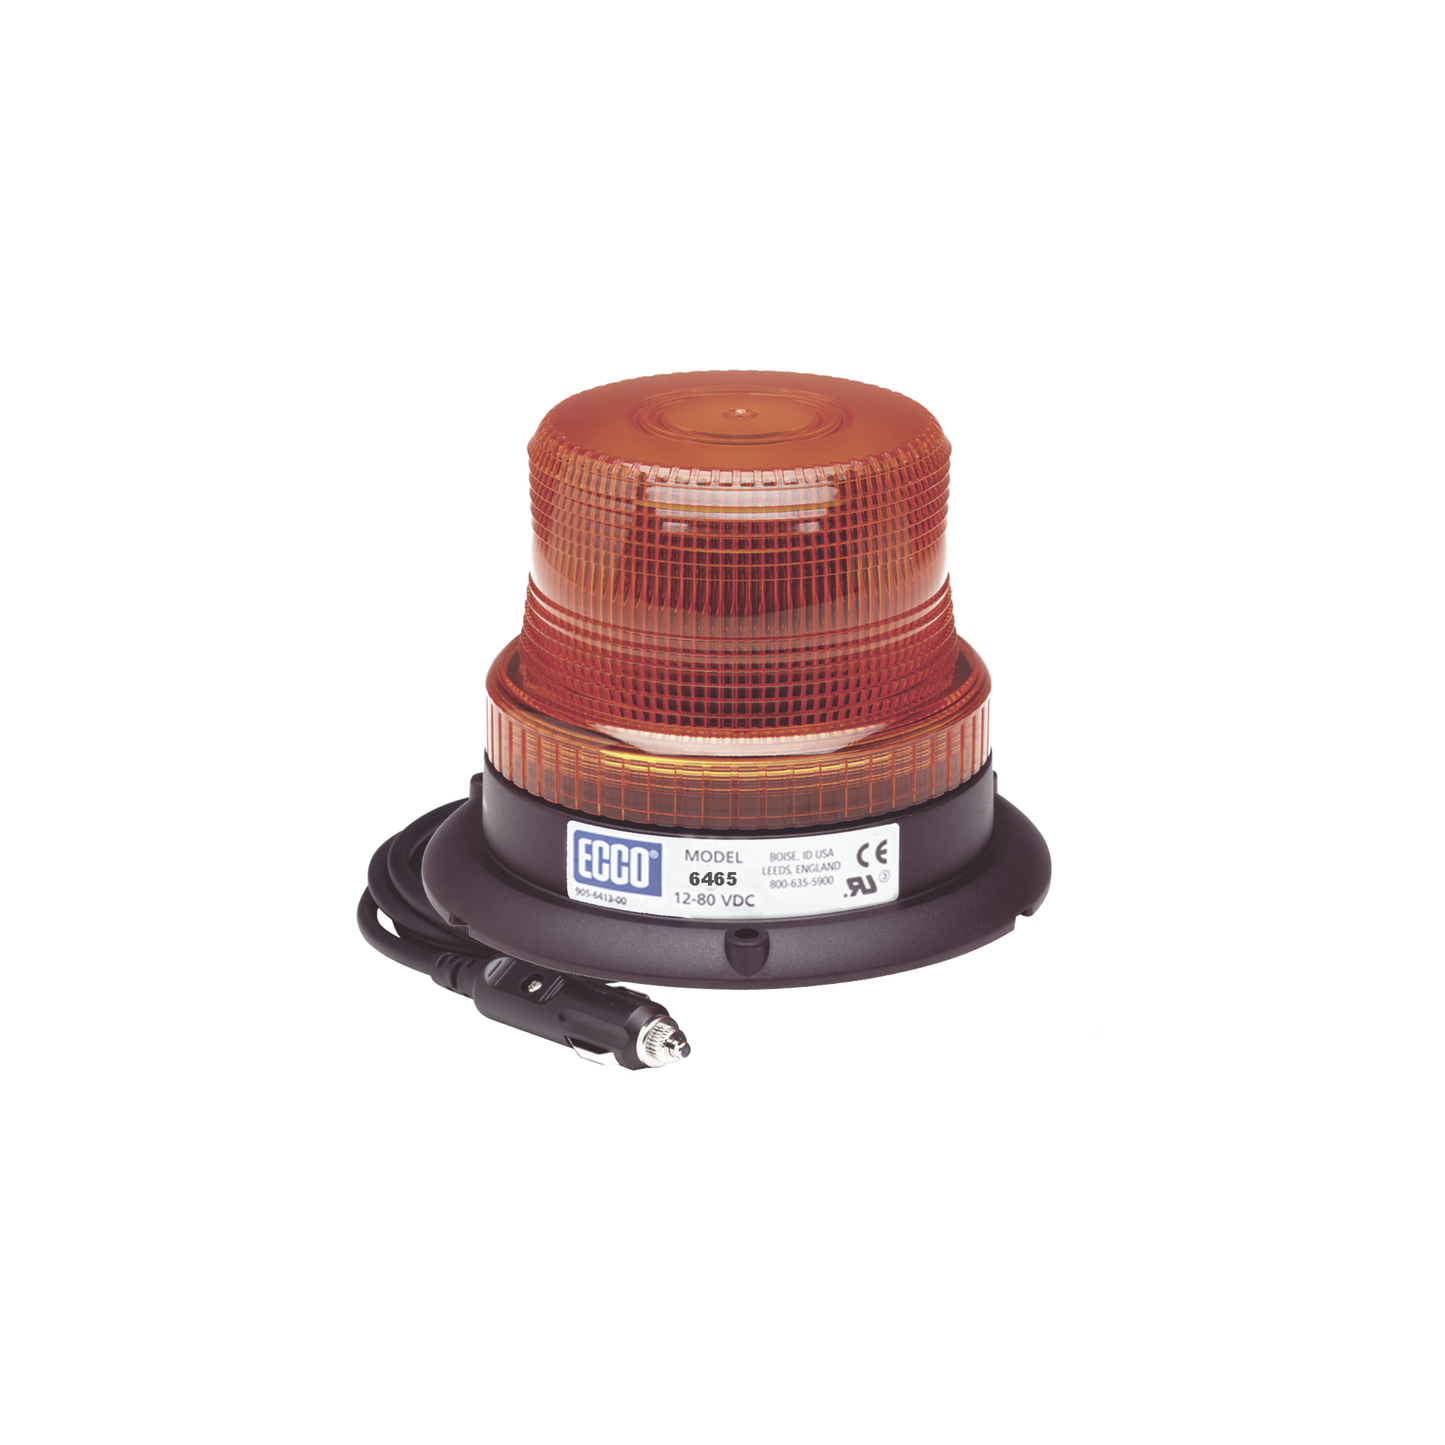 Amber Mini LED Beacon X6465 Series with vacuum magnetic mount